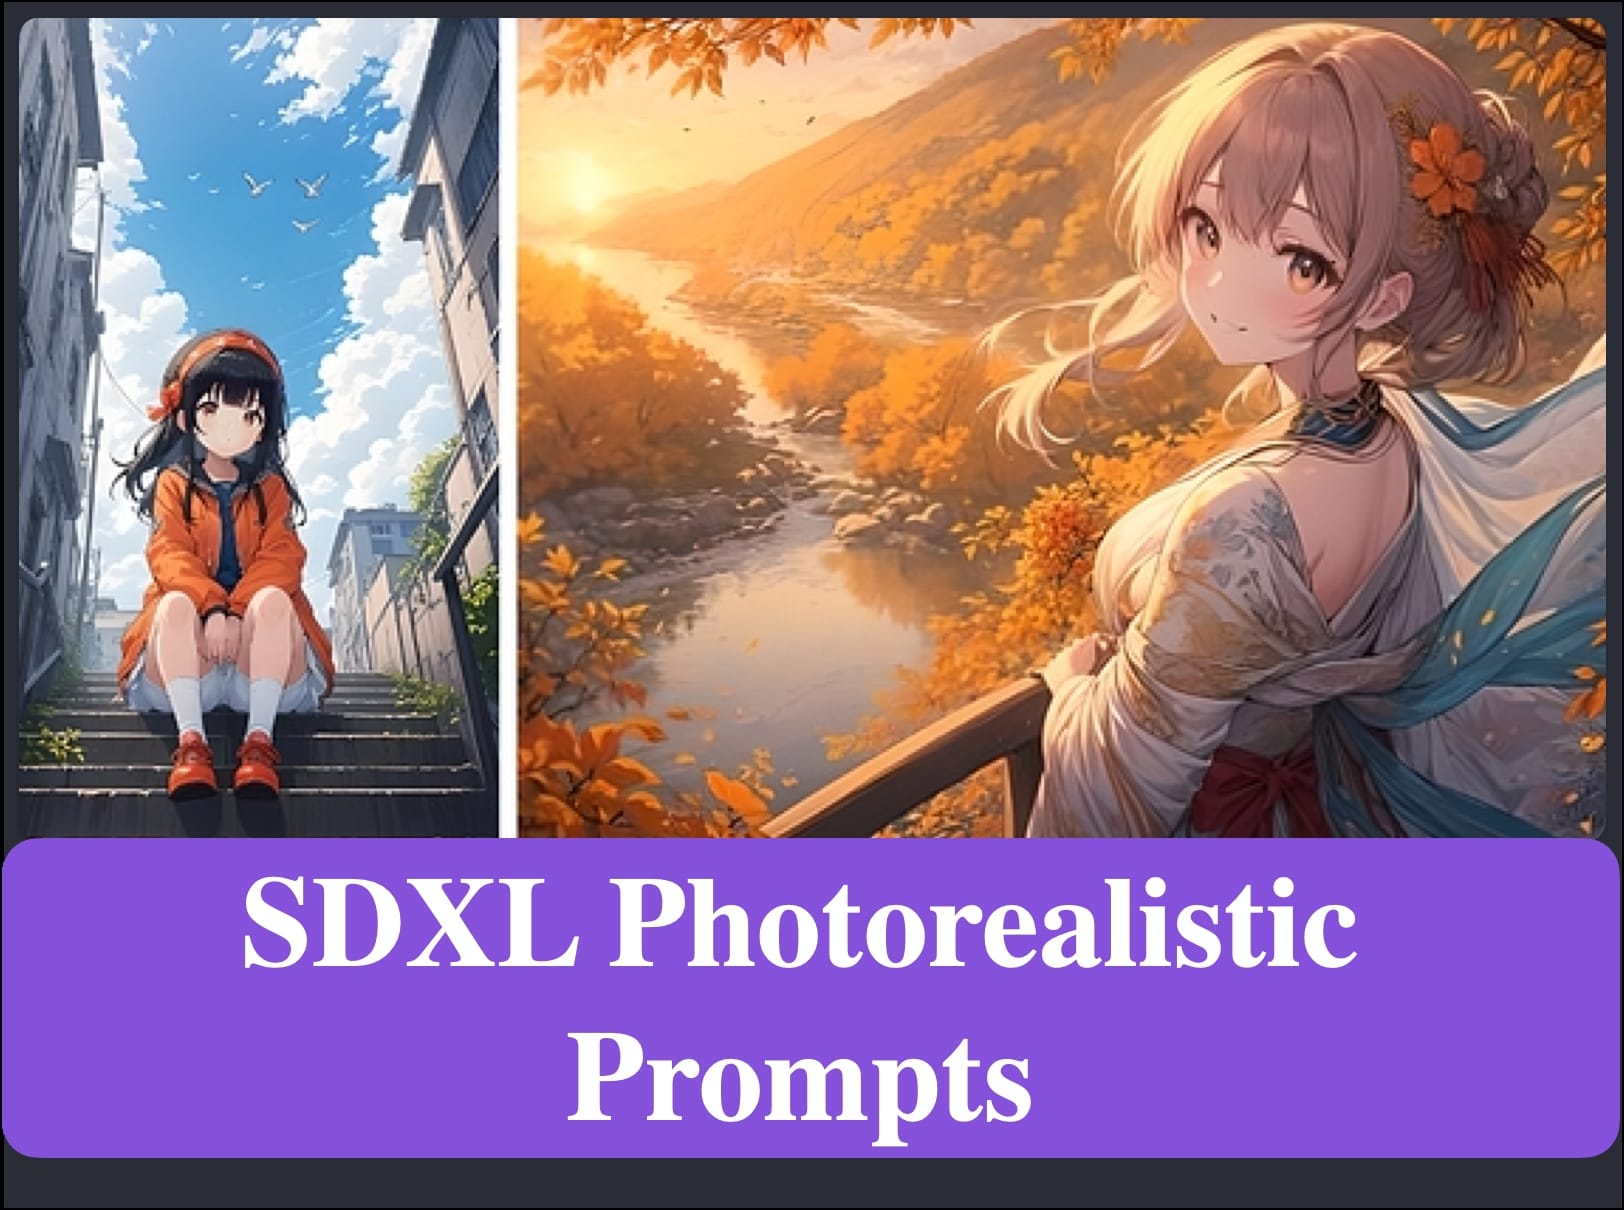 Photorealistic SDXL Prompts for Stunning Images